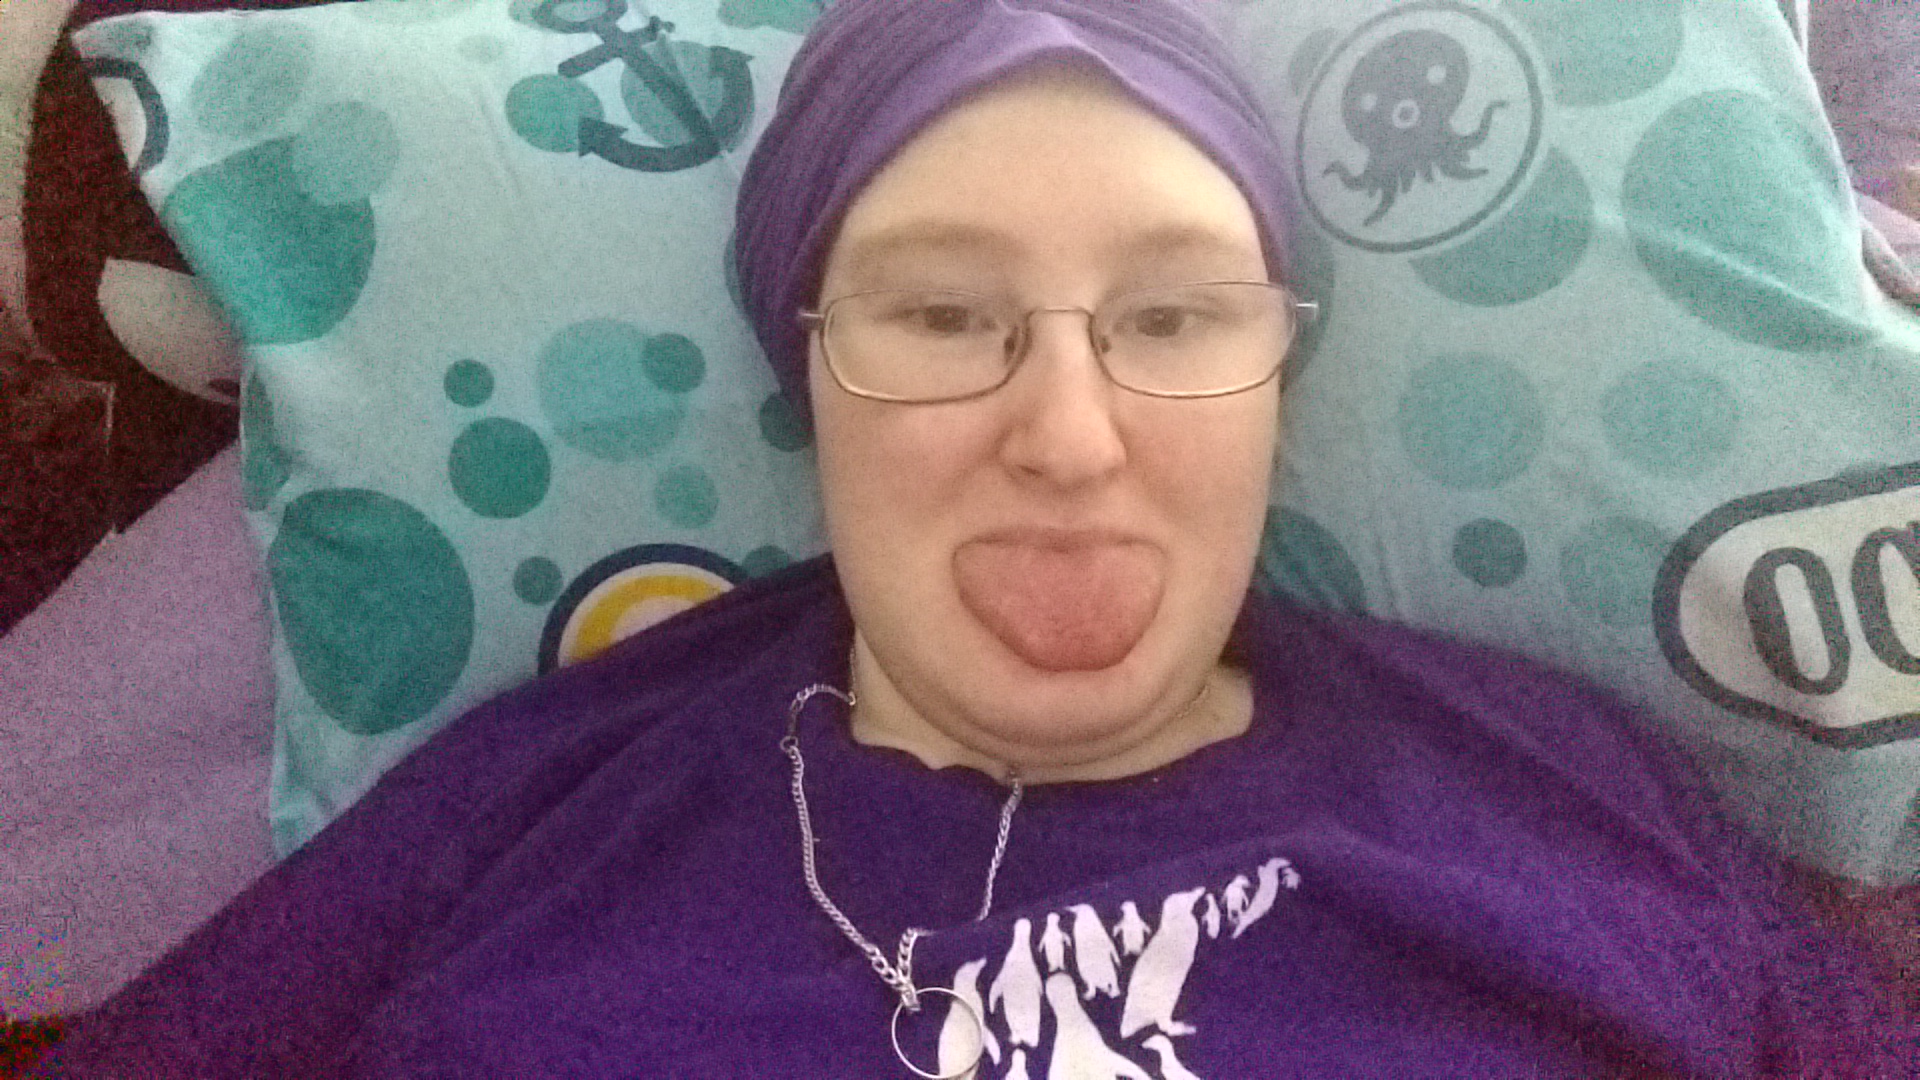 Danni is lying in bed wearing a purple turban. They are sticking their tongue out. 